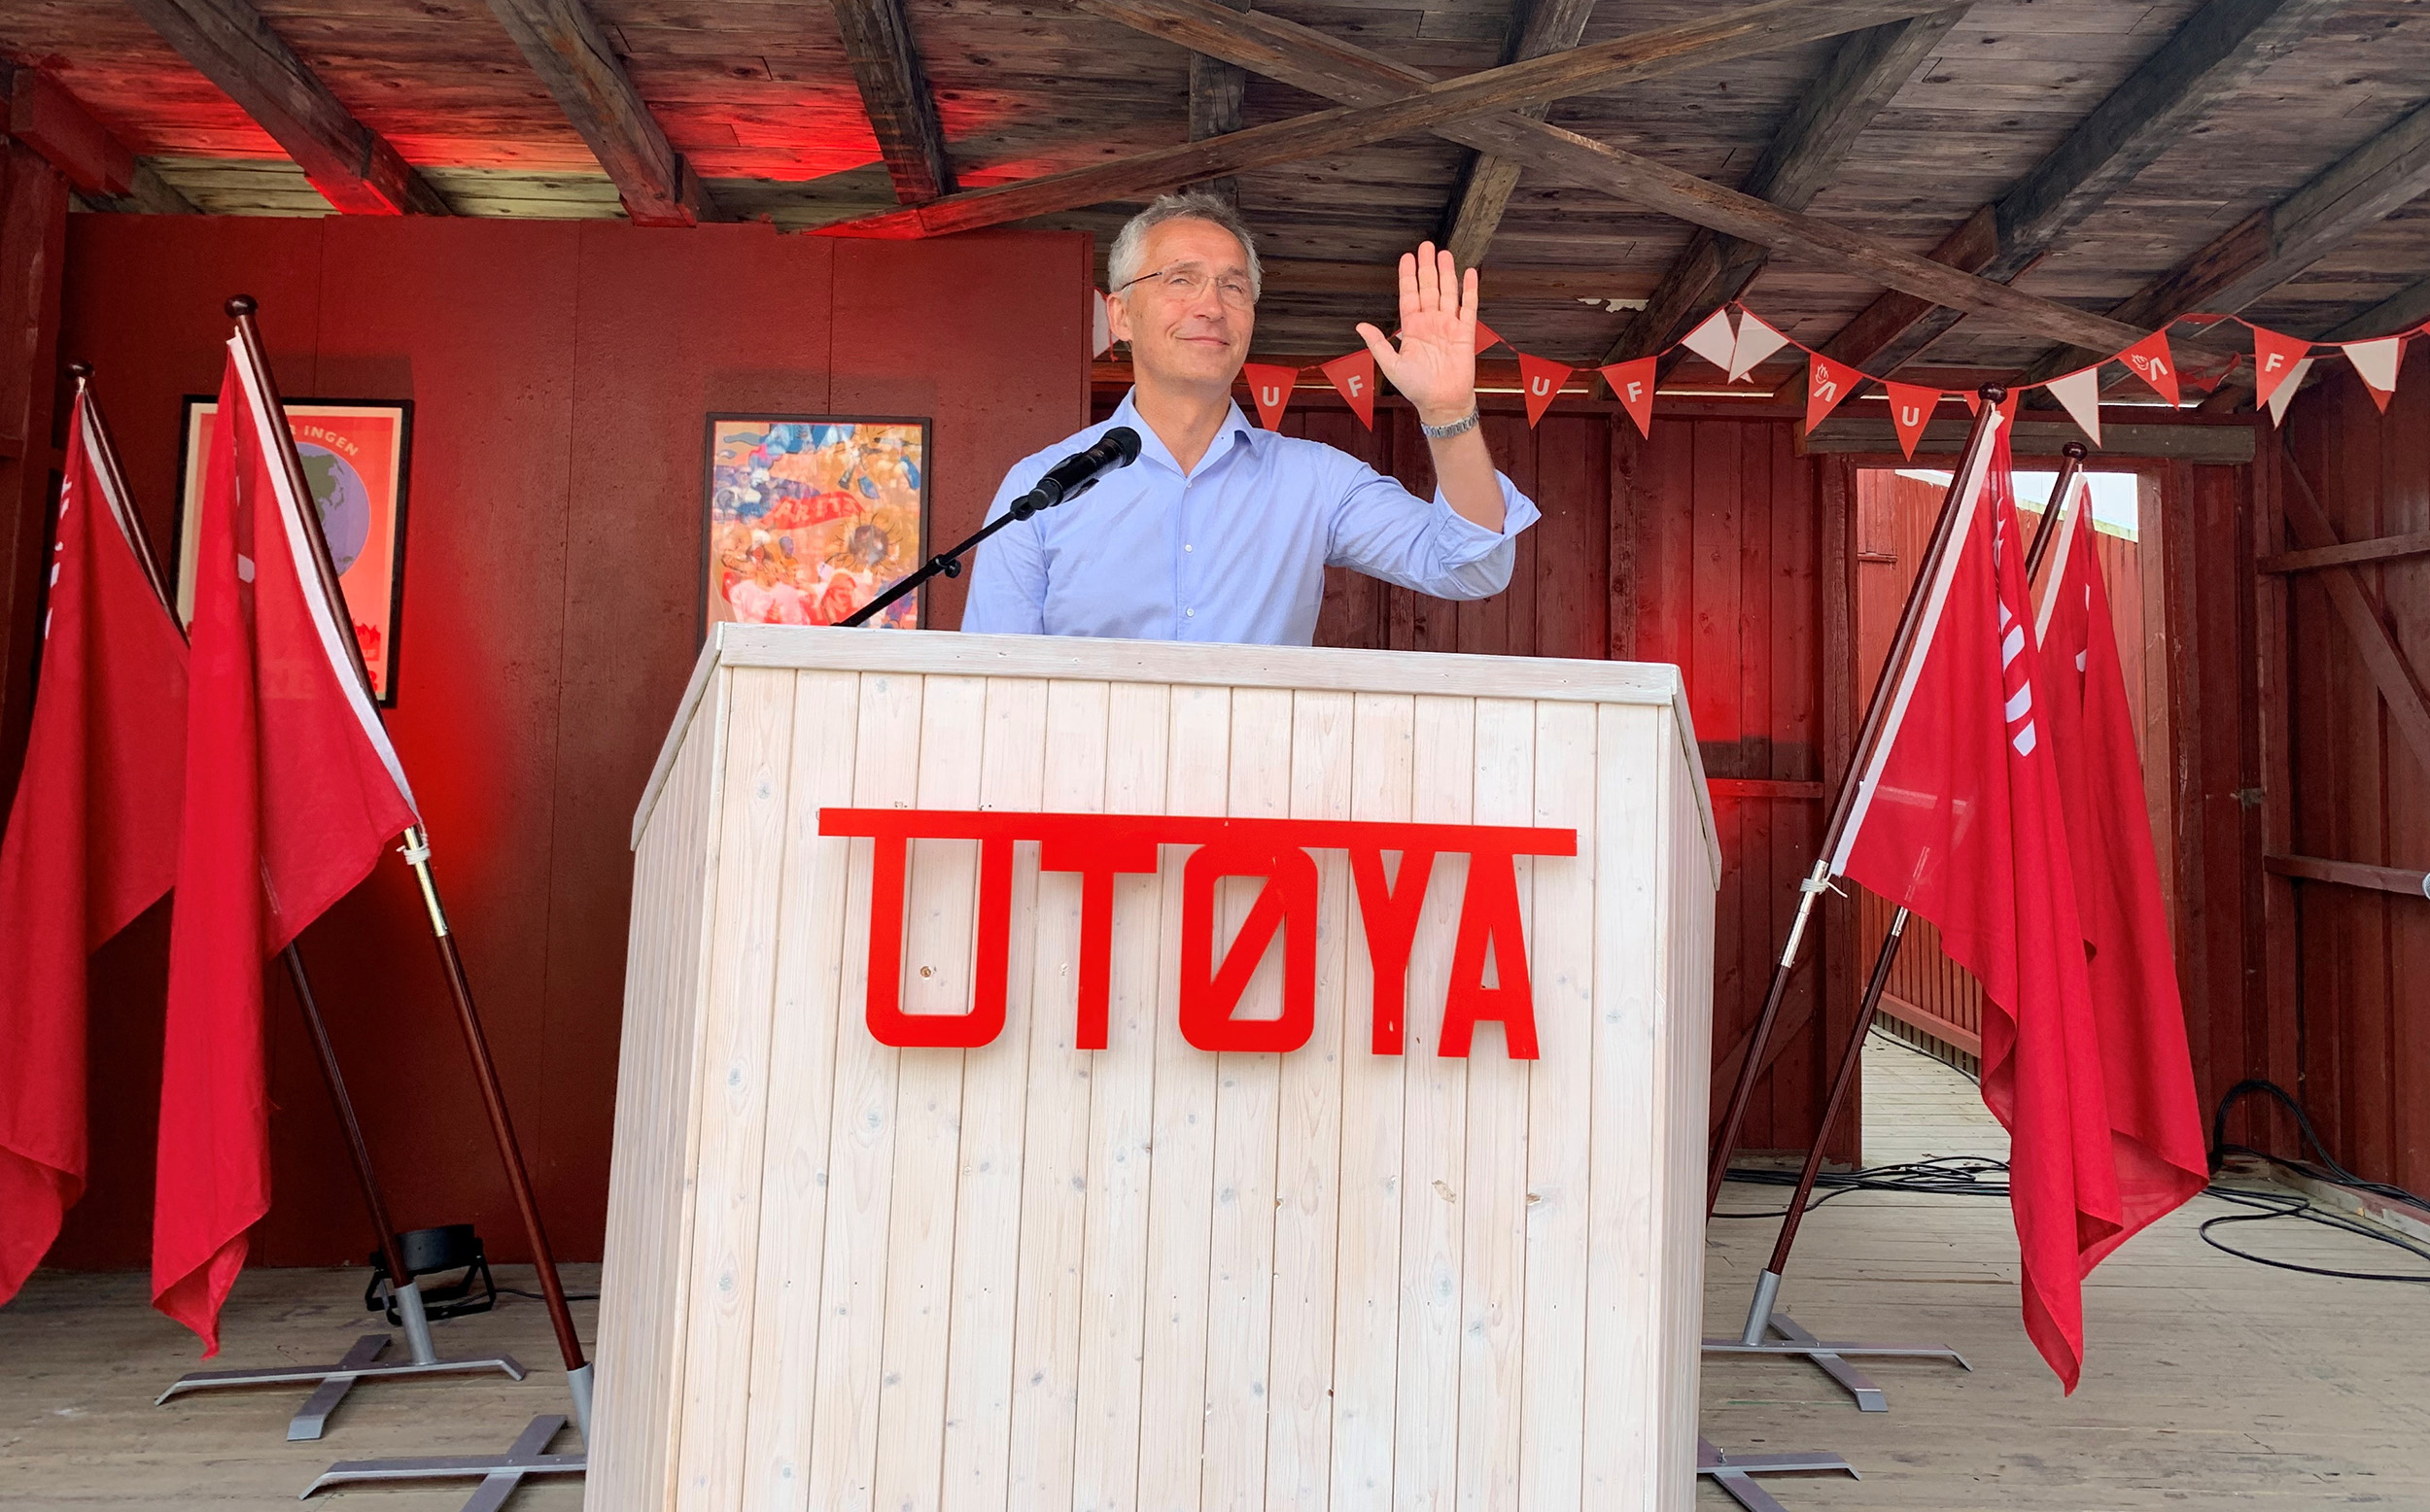 NATO Secretary General Jens Stoltenberg gives a speech to a youth camp in Utoya, Norway, on August 4.